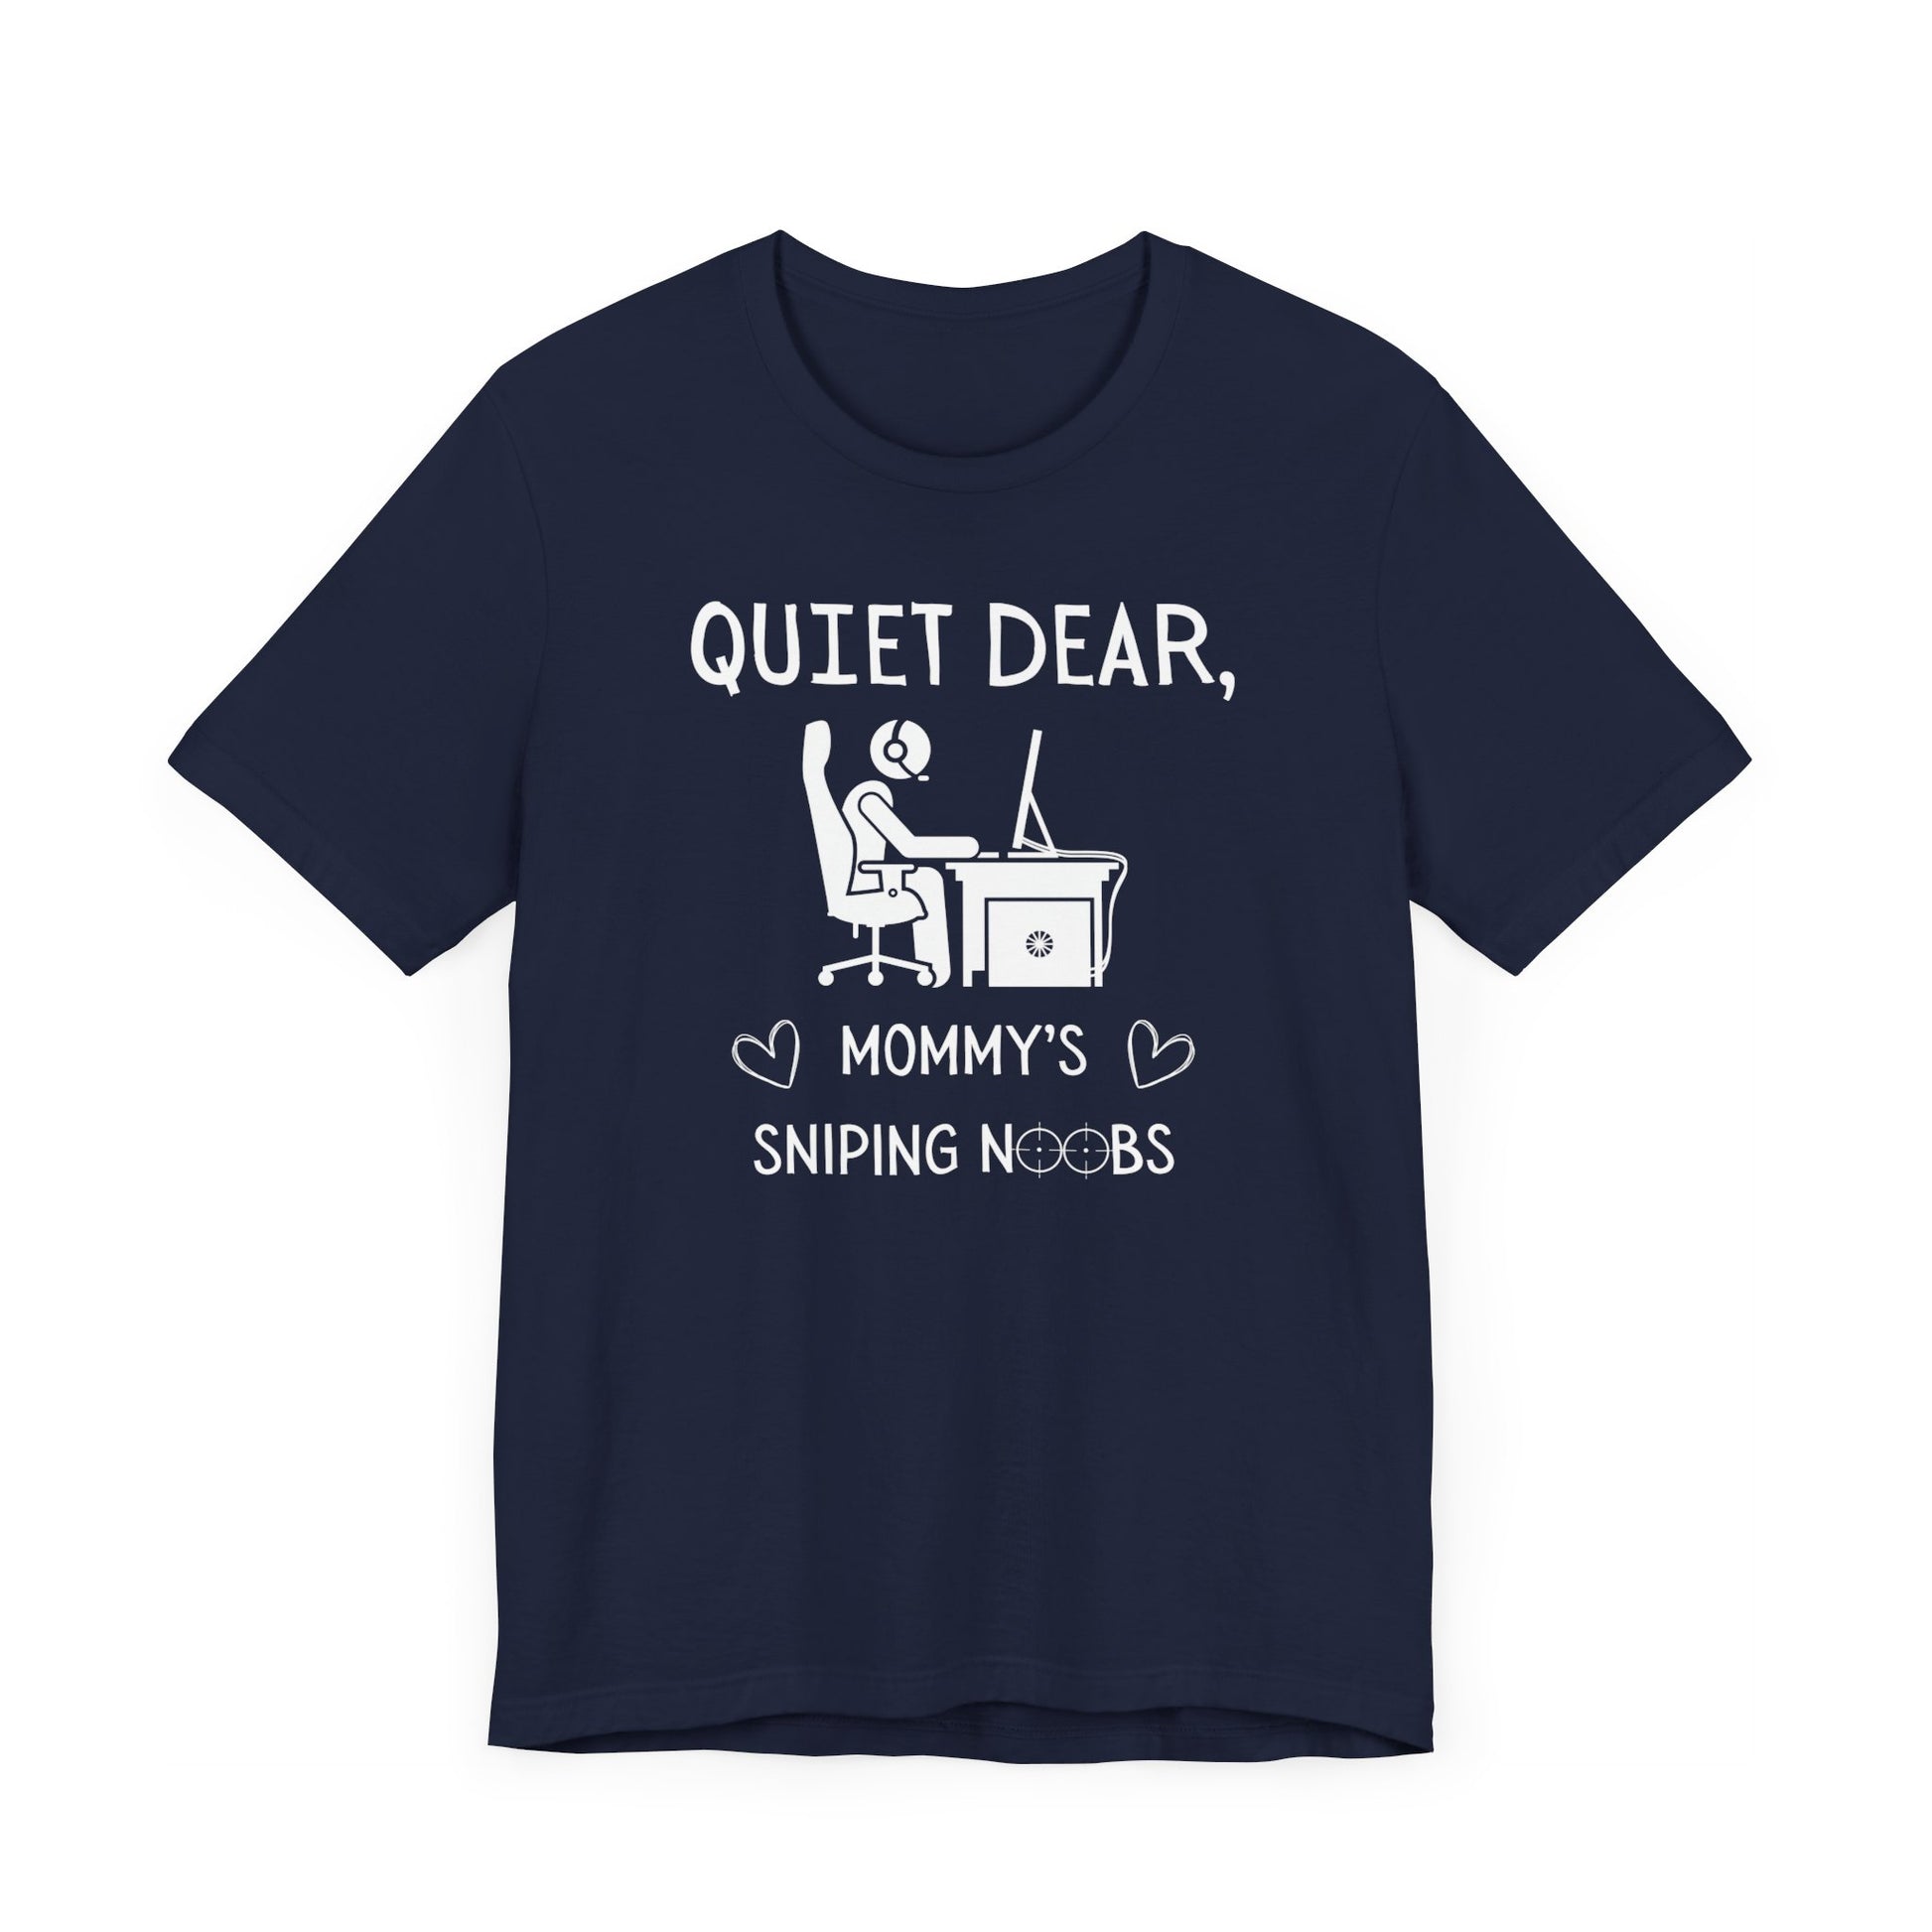 A flat image of a navy t-shirt that reads Quiet Dear, Mommy's Sniping Noobs in white text. The lower text is framed by two hearts, and the O's are in the shape of sniper scopes. In the center of the shirt is an image of a person at a desk with a gaming PC.